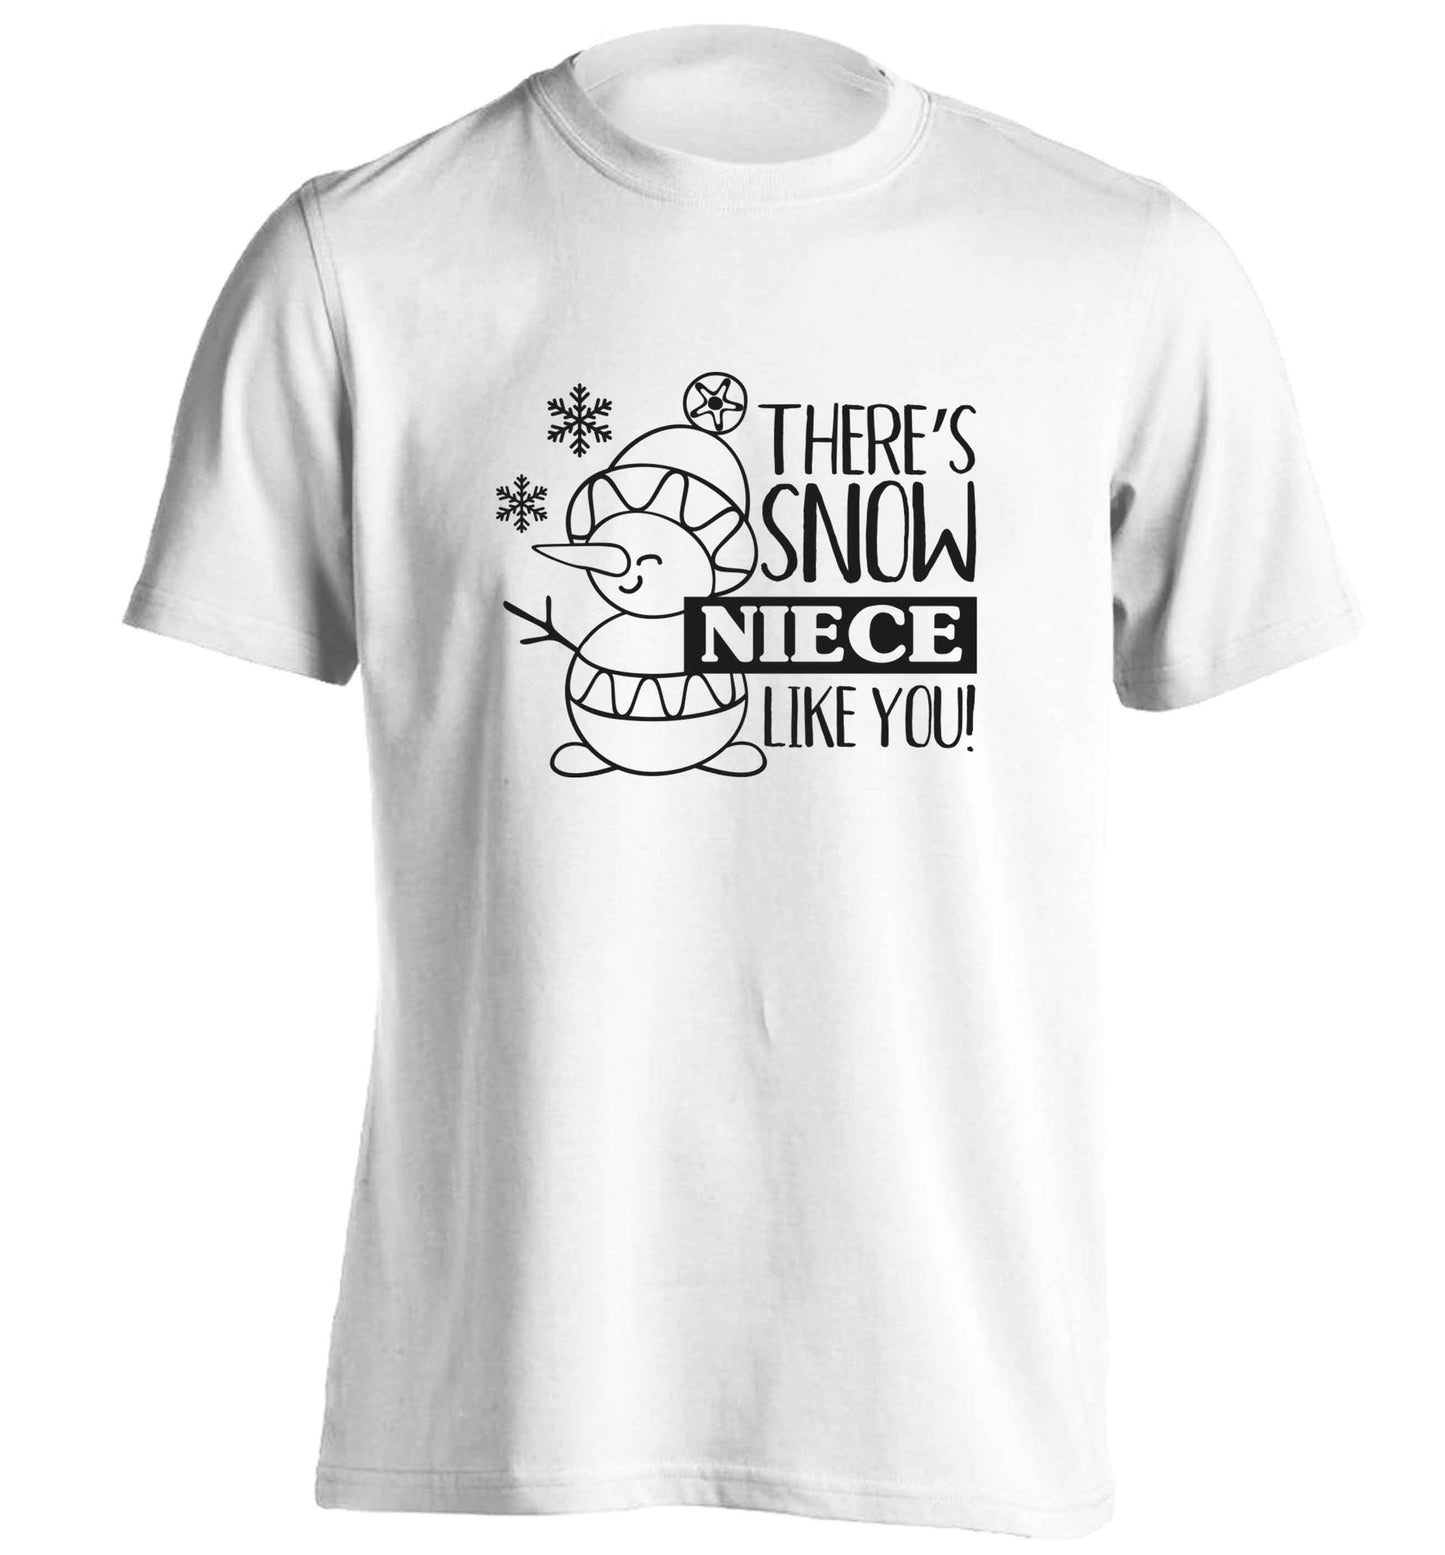 There's snow niece like you adults unisex white Tshirt 2XL